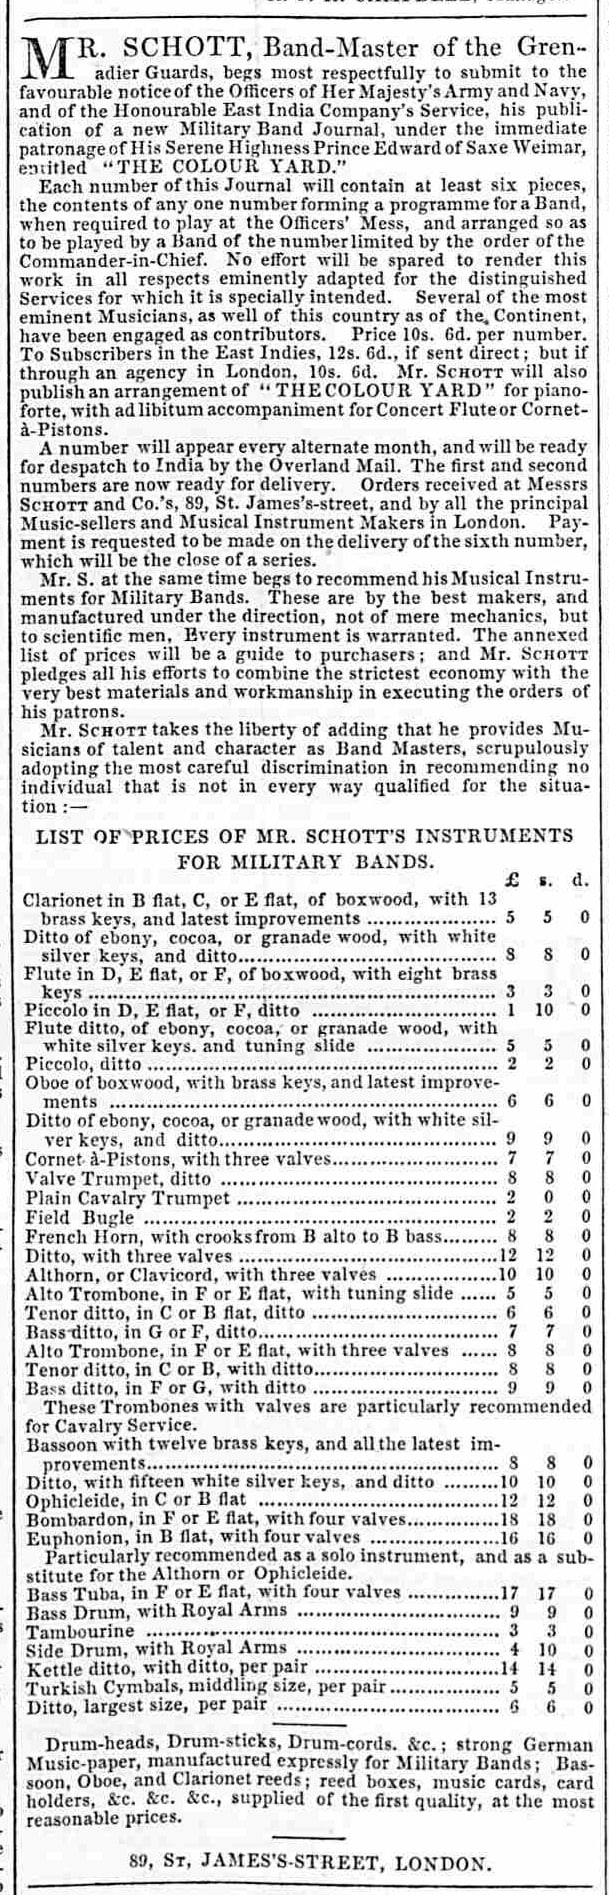 [Advertisement], British Army Despatch (17 May 1850), 24